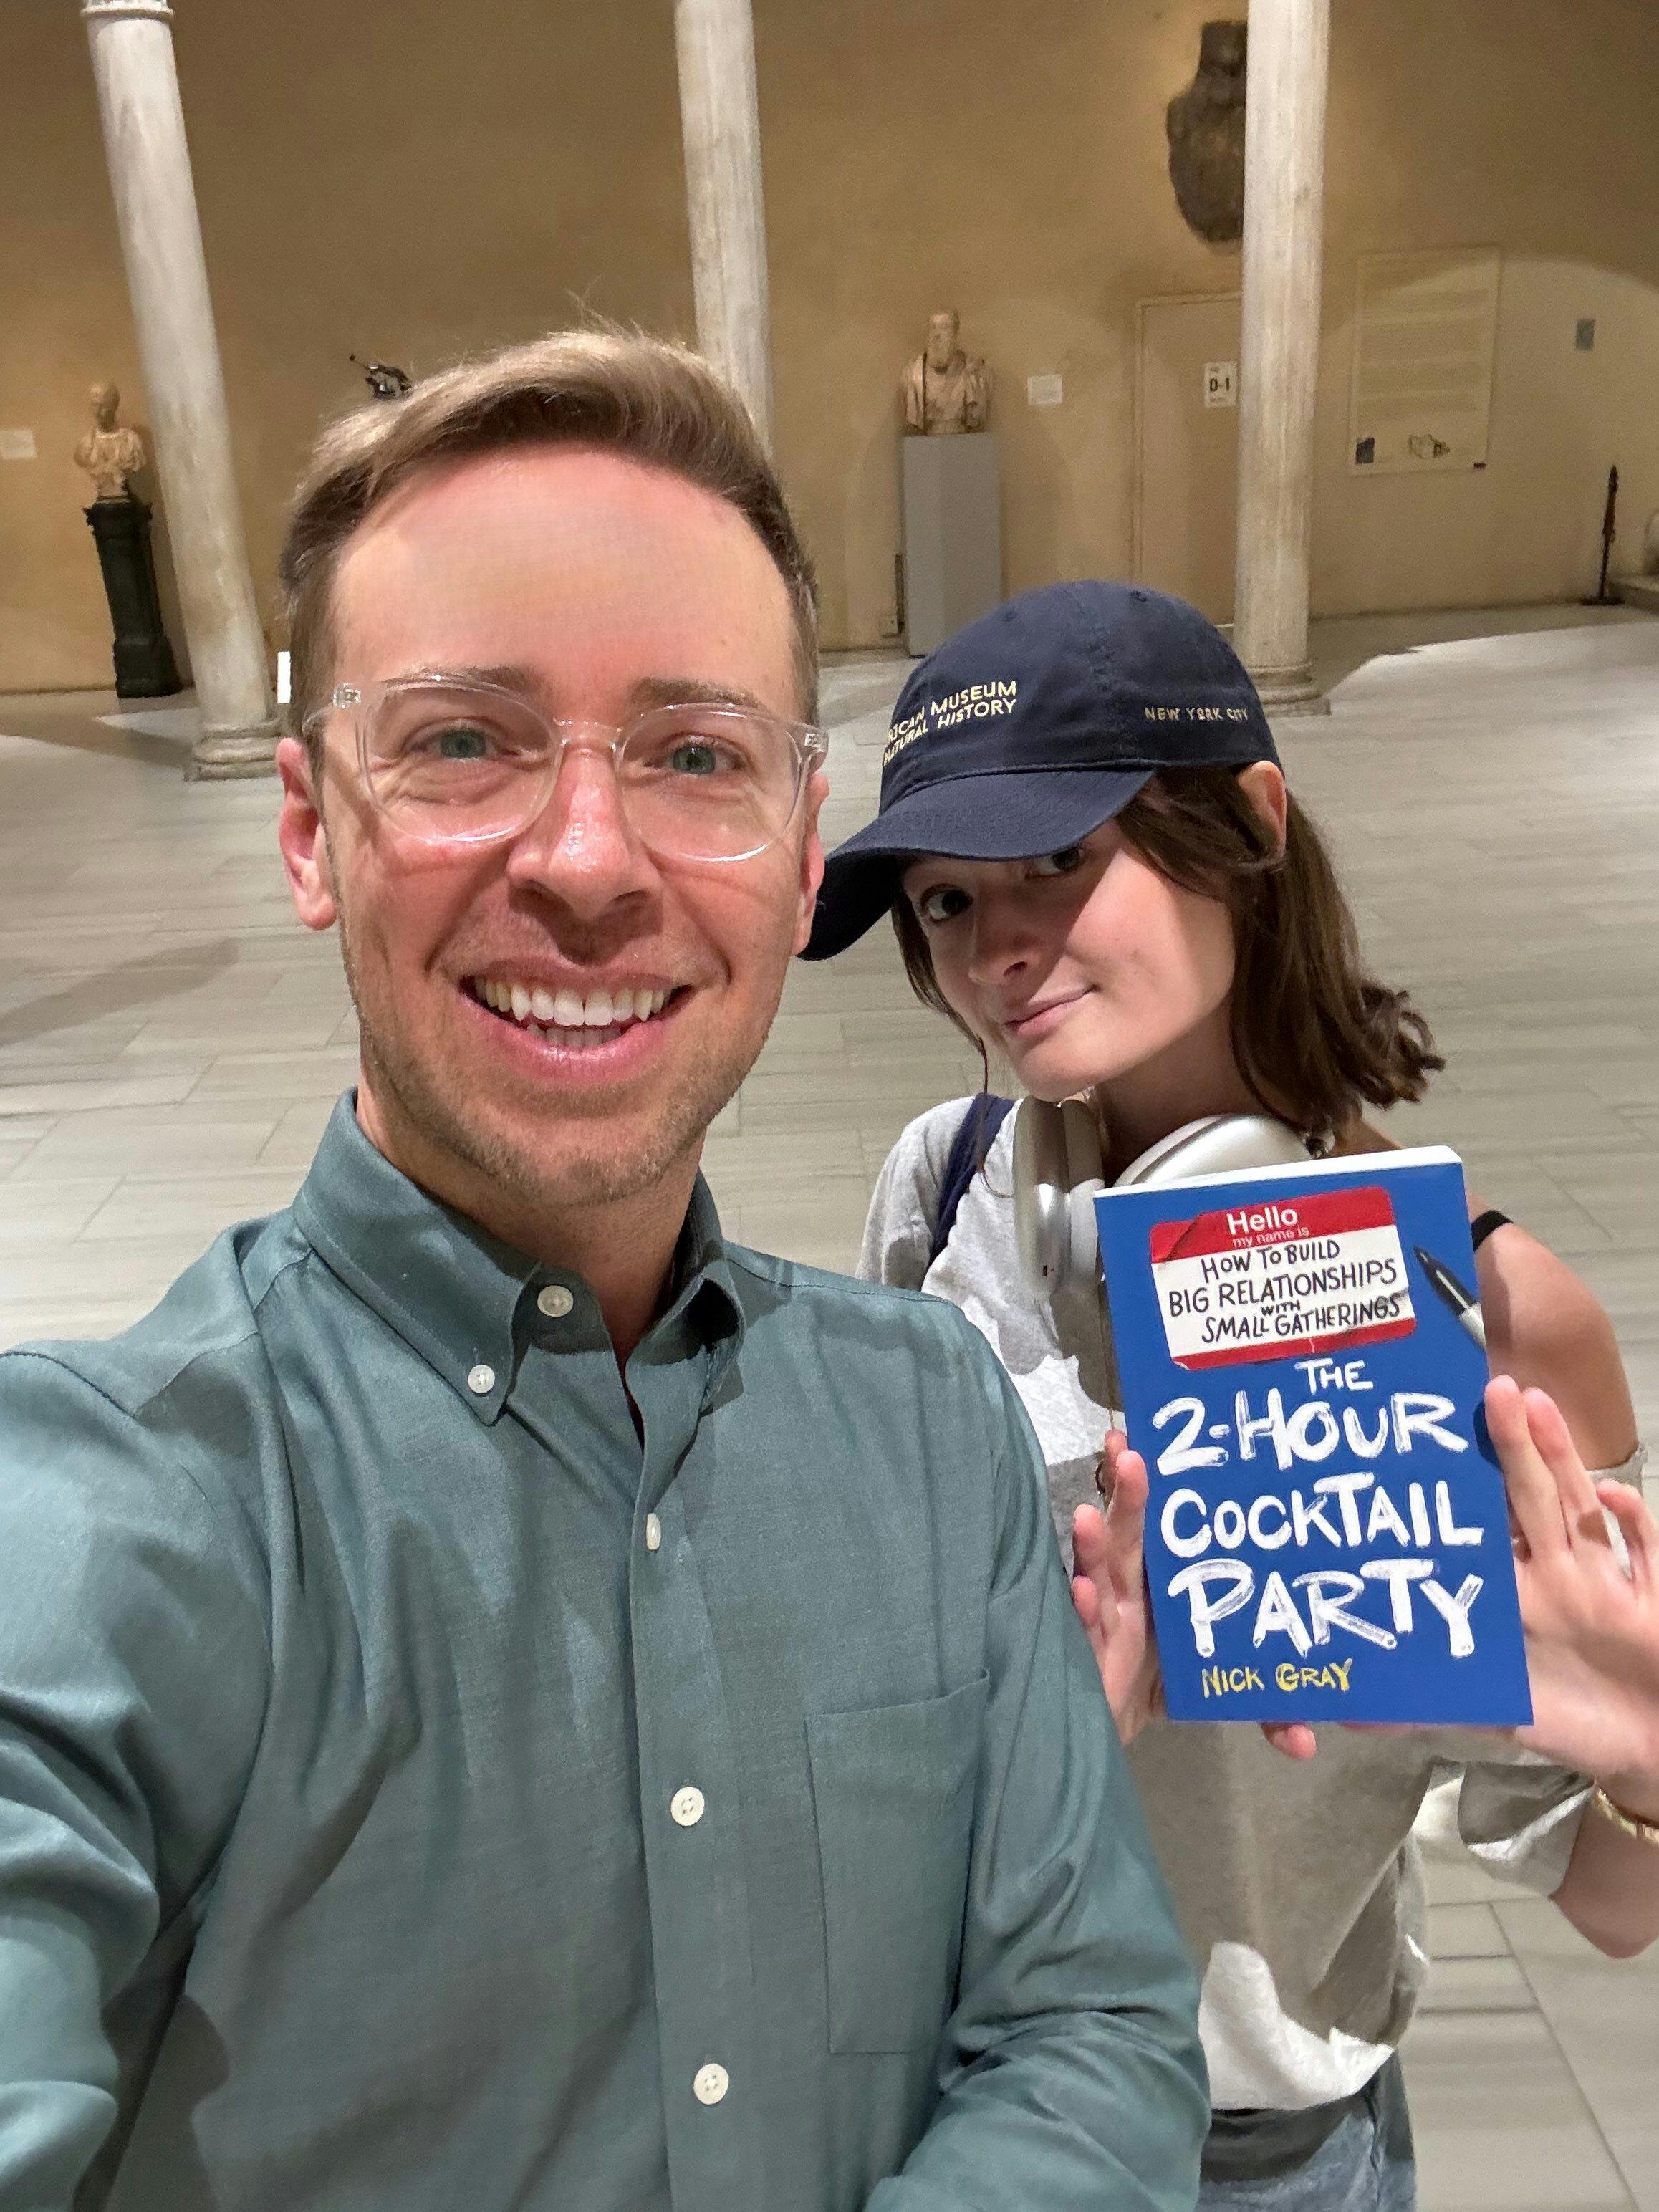 A selfie of Nick Gray and his friend Caitlin while holding his book The 2-Hour Cocktail Party